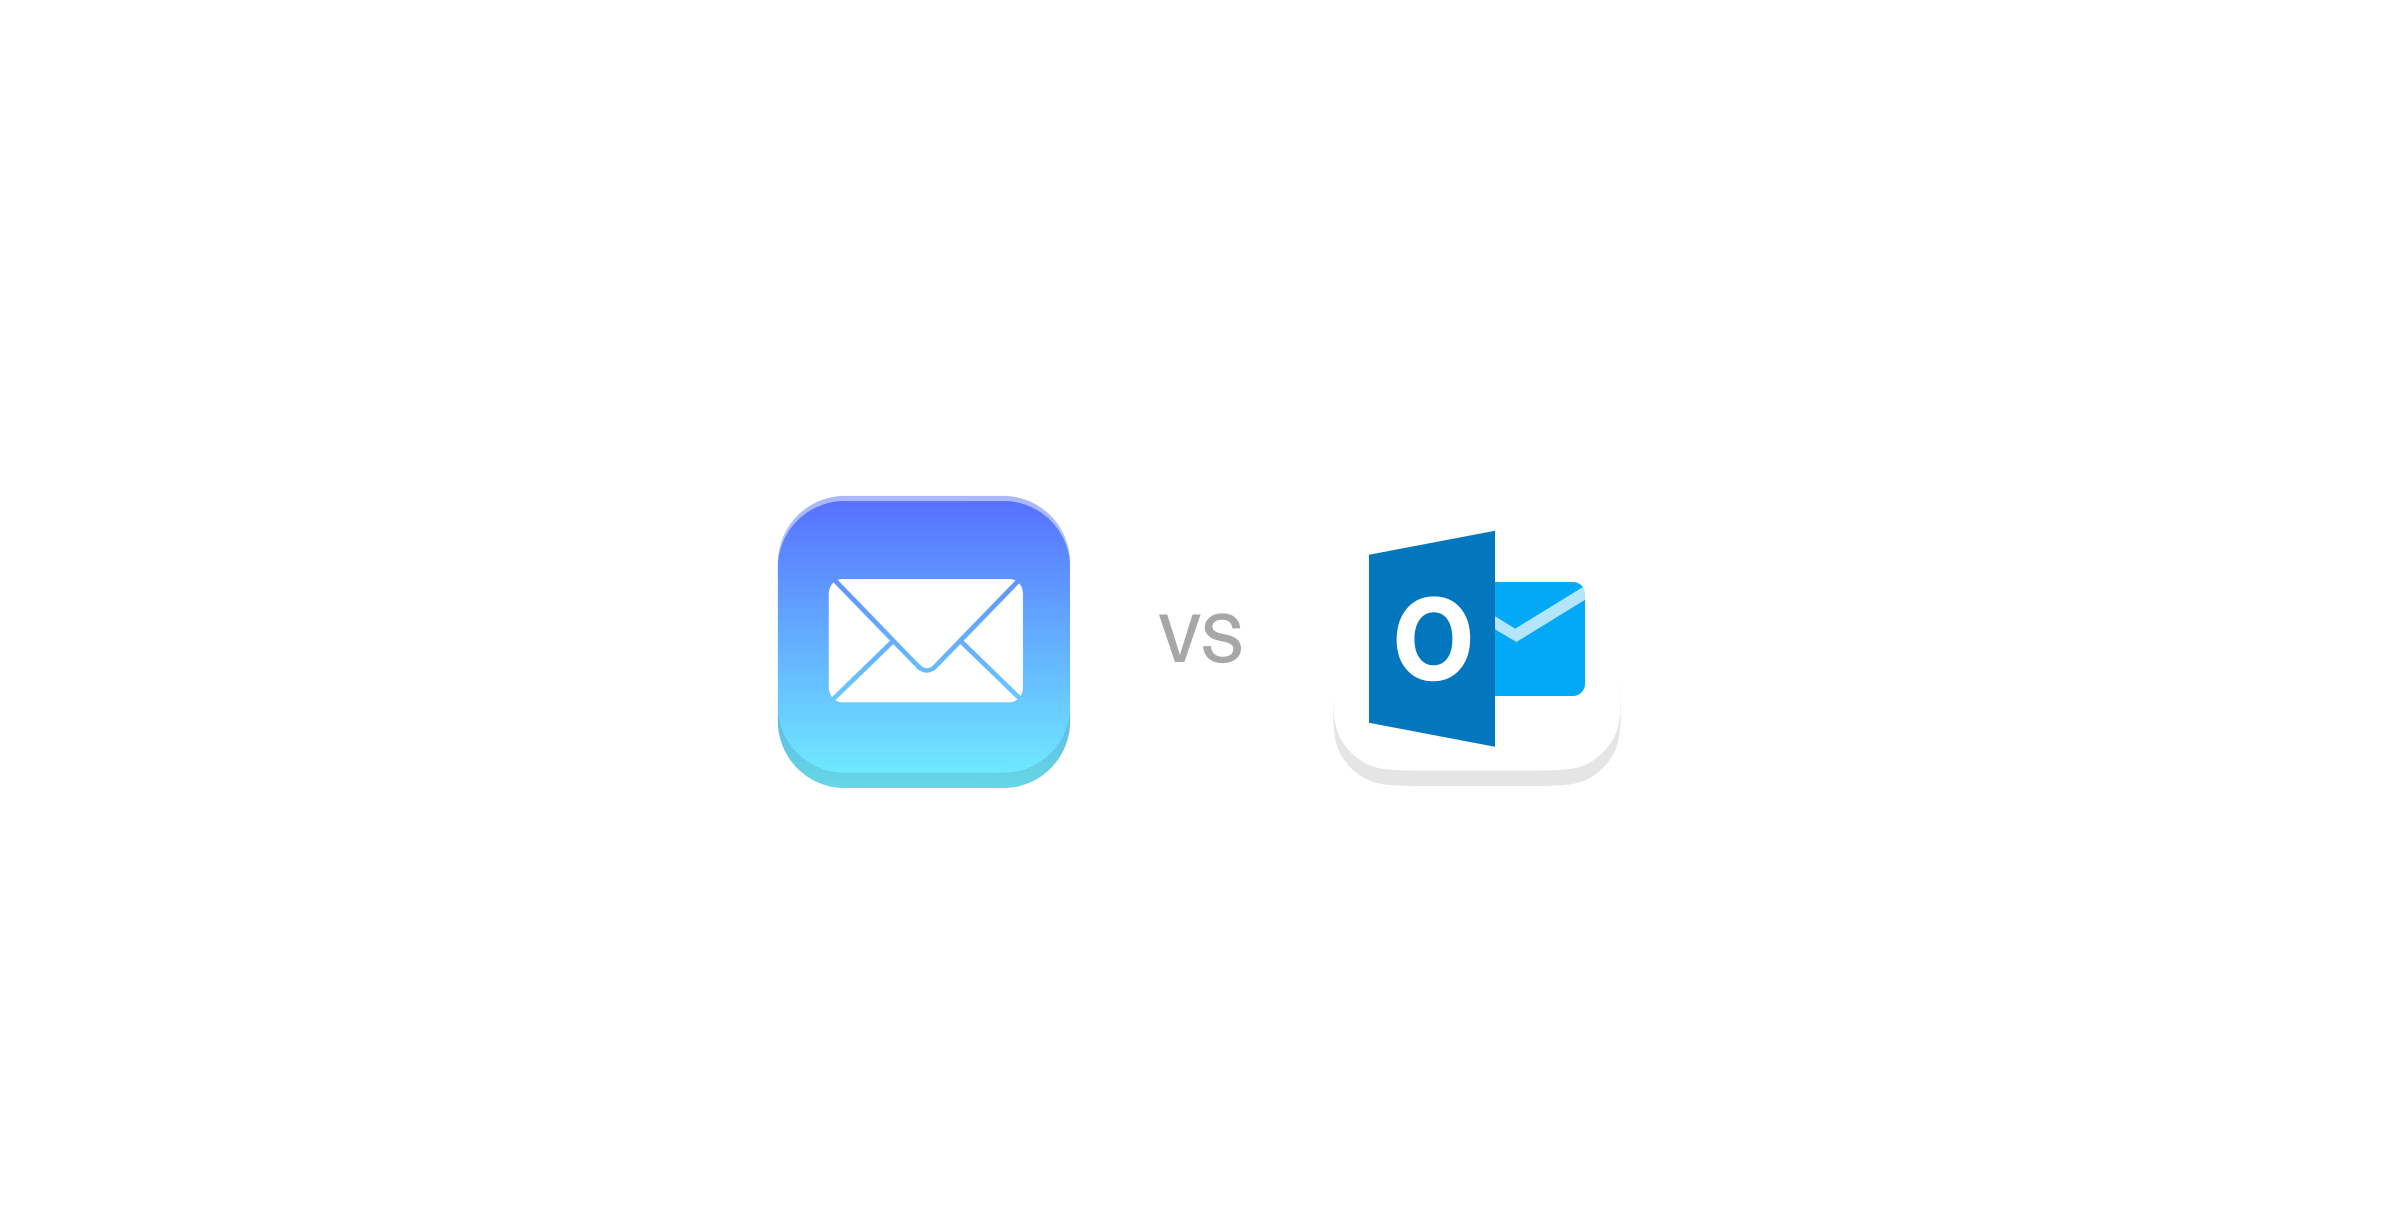 Apple Mail vs. Outlook—which email client to choose in 2023? Read more